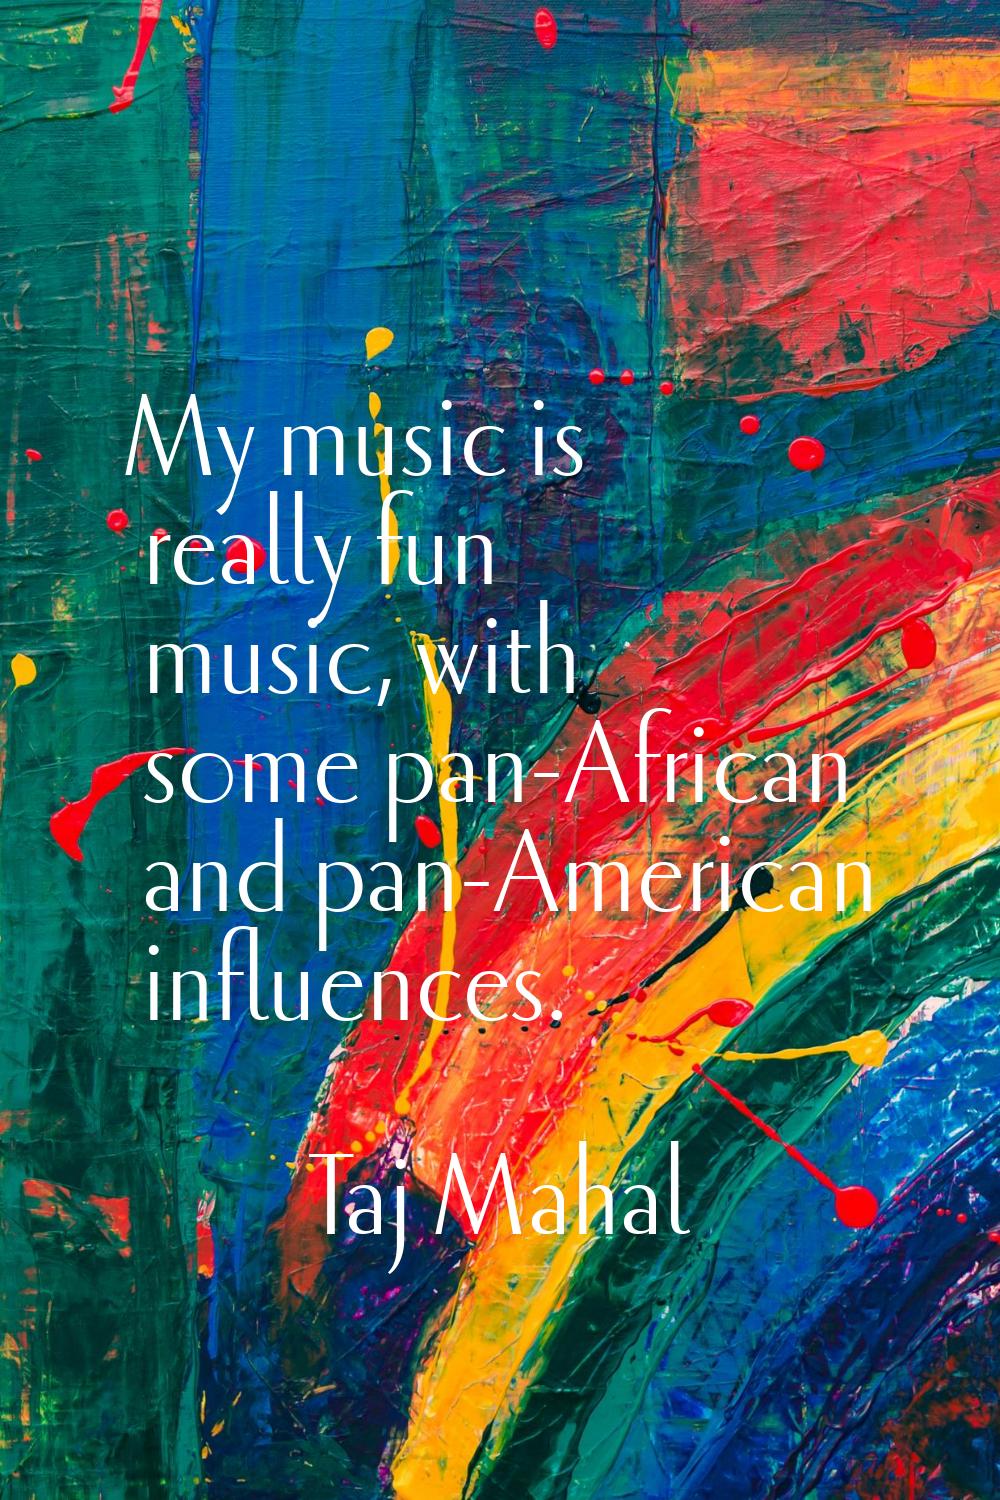 My music is really fun music, with some pan-African and pan-American influences.